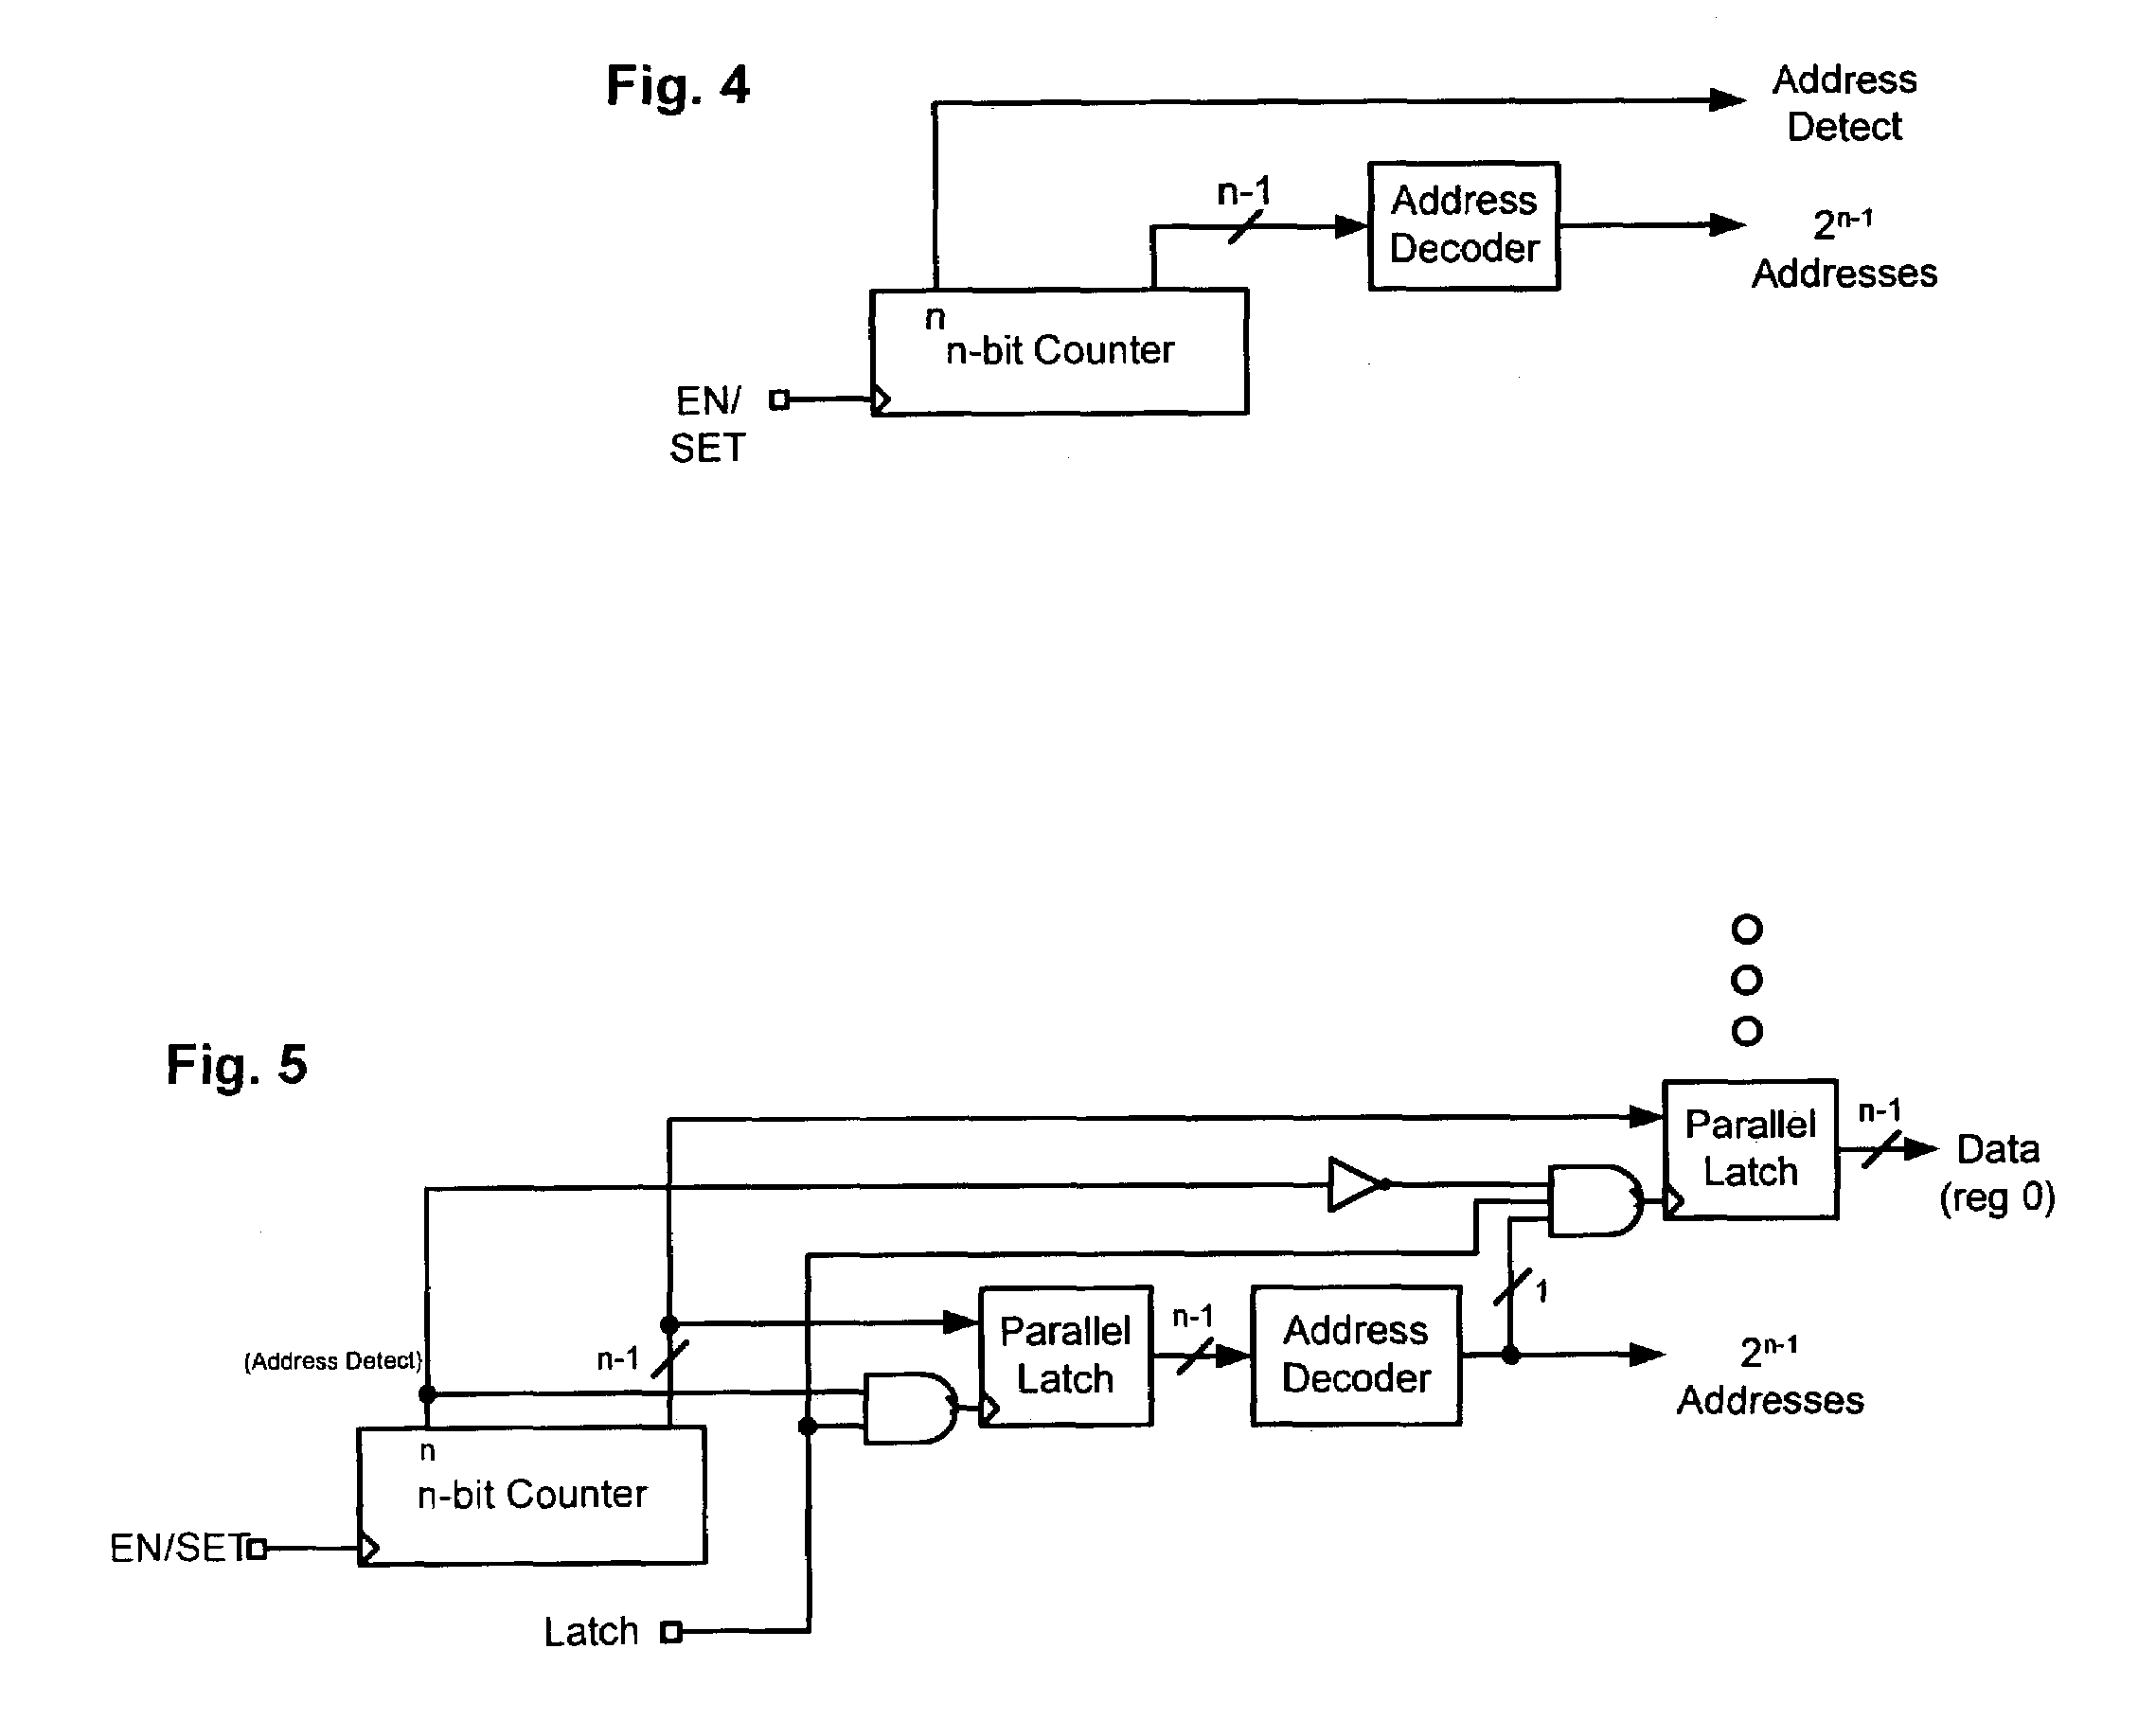 Single wire network for sending data in predetermined periods and next register address immediately thereafter and storing data in register identified in last cycle